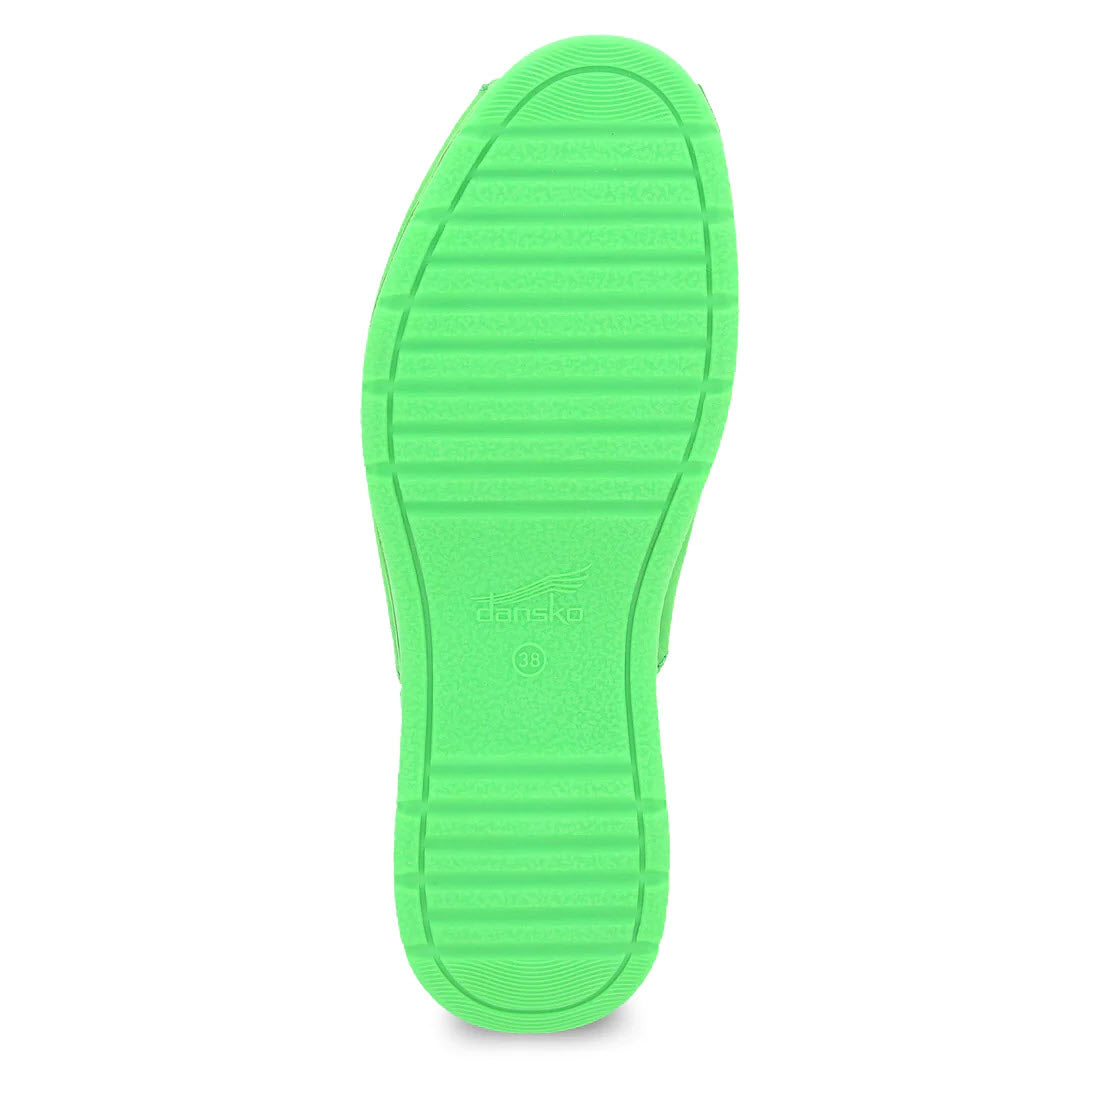 Bright green shoe sole with textured pattern and &quot;Dansko&quot; brand logo embossed at the center, featuring Ravyn stapled construction.